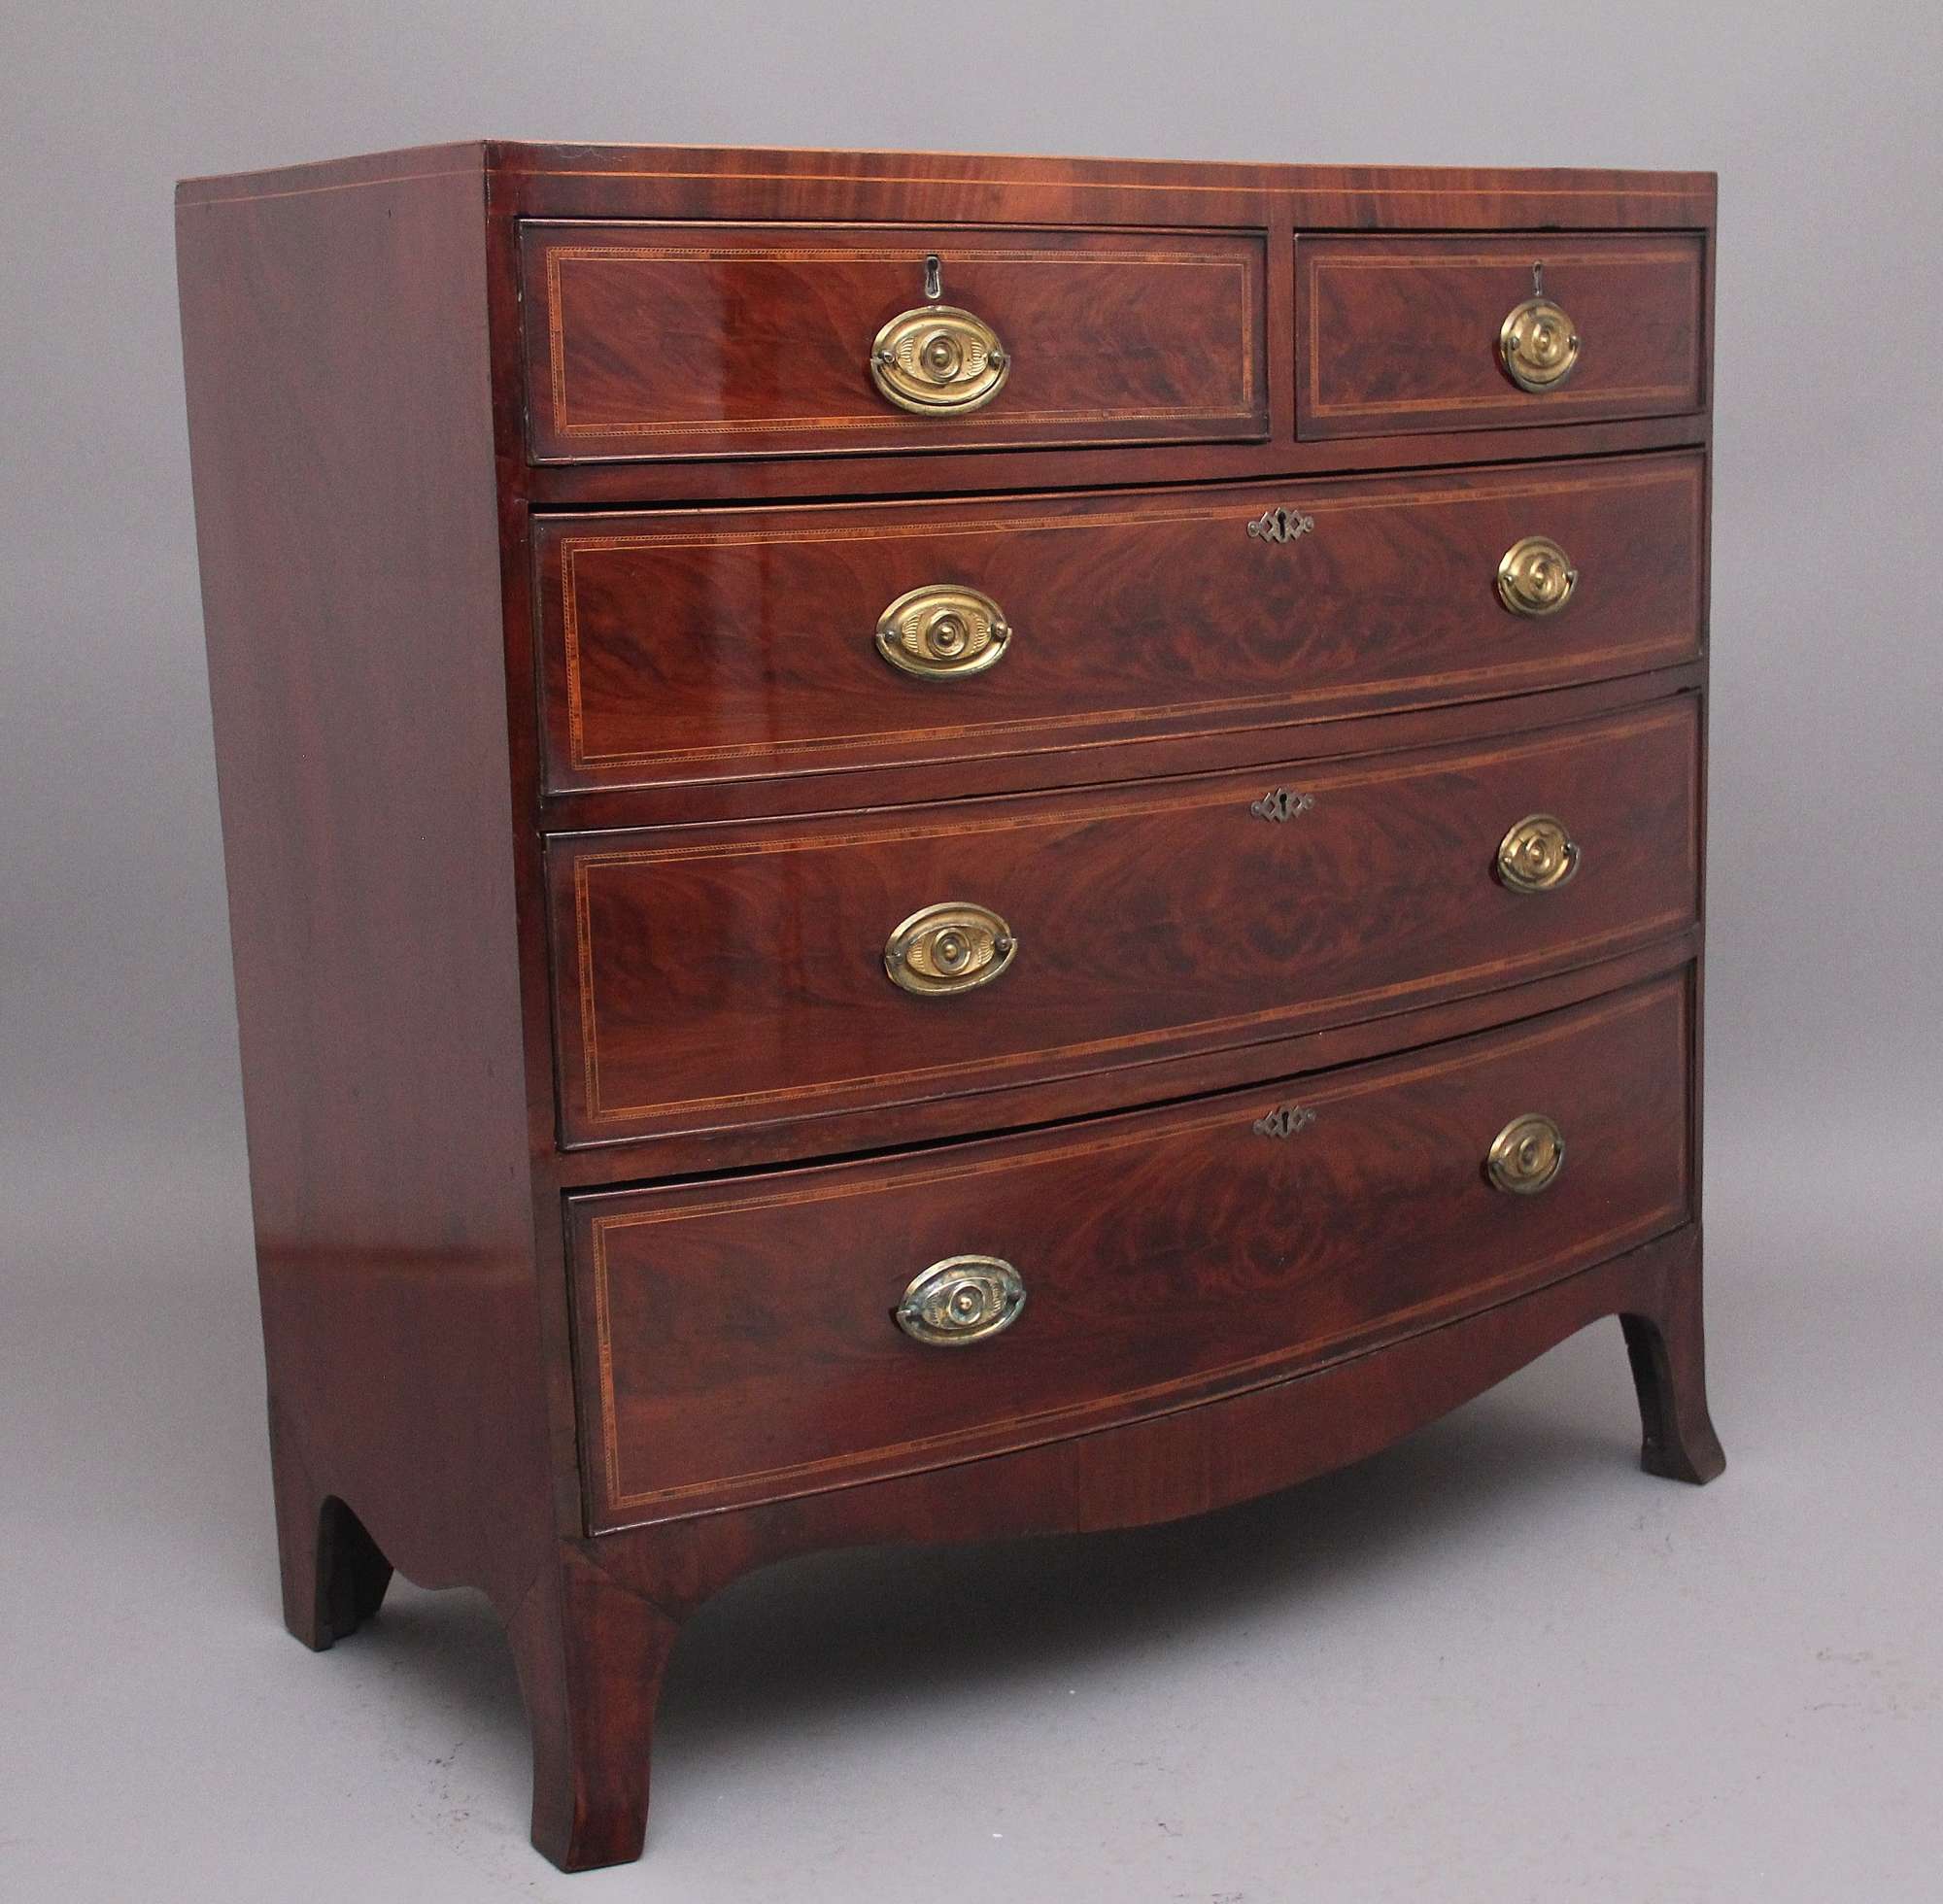 Early 19th Century Mahogany Inlaid Antique Chest Of Drawers